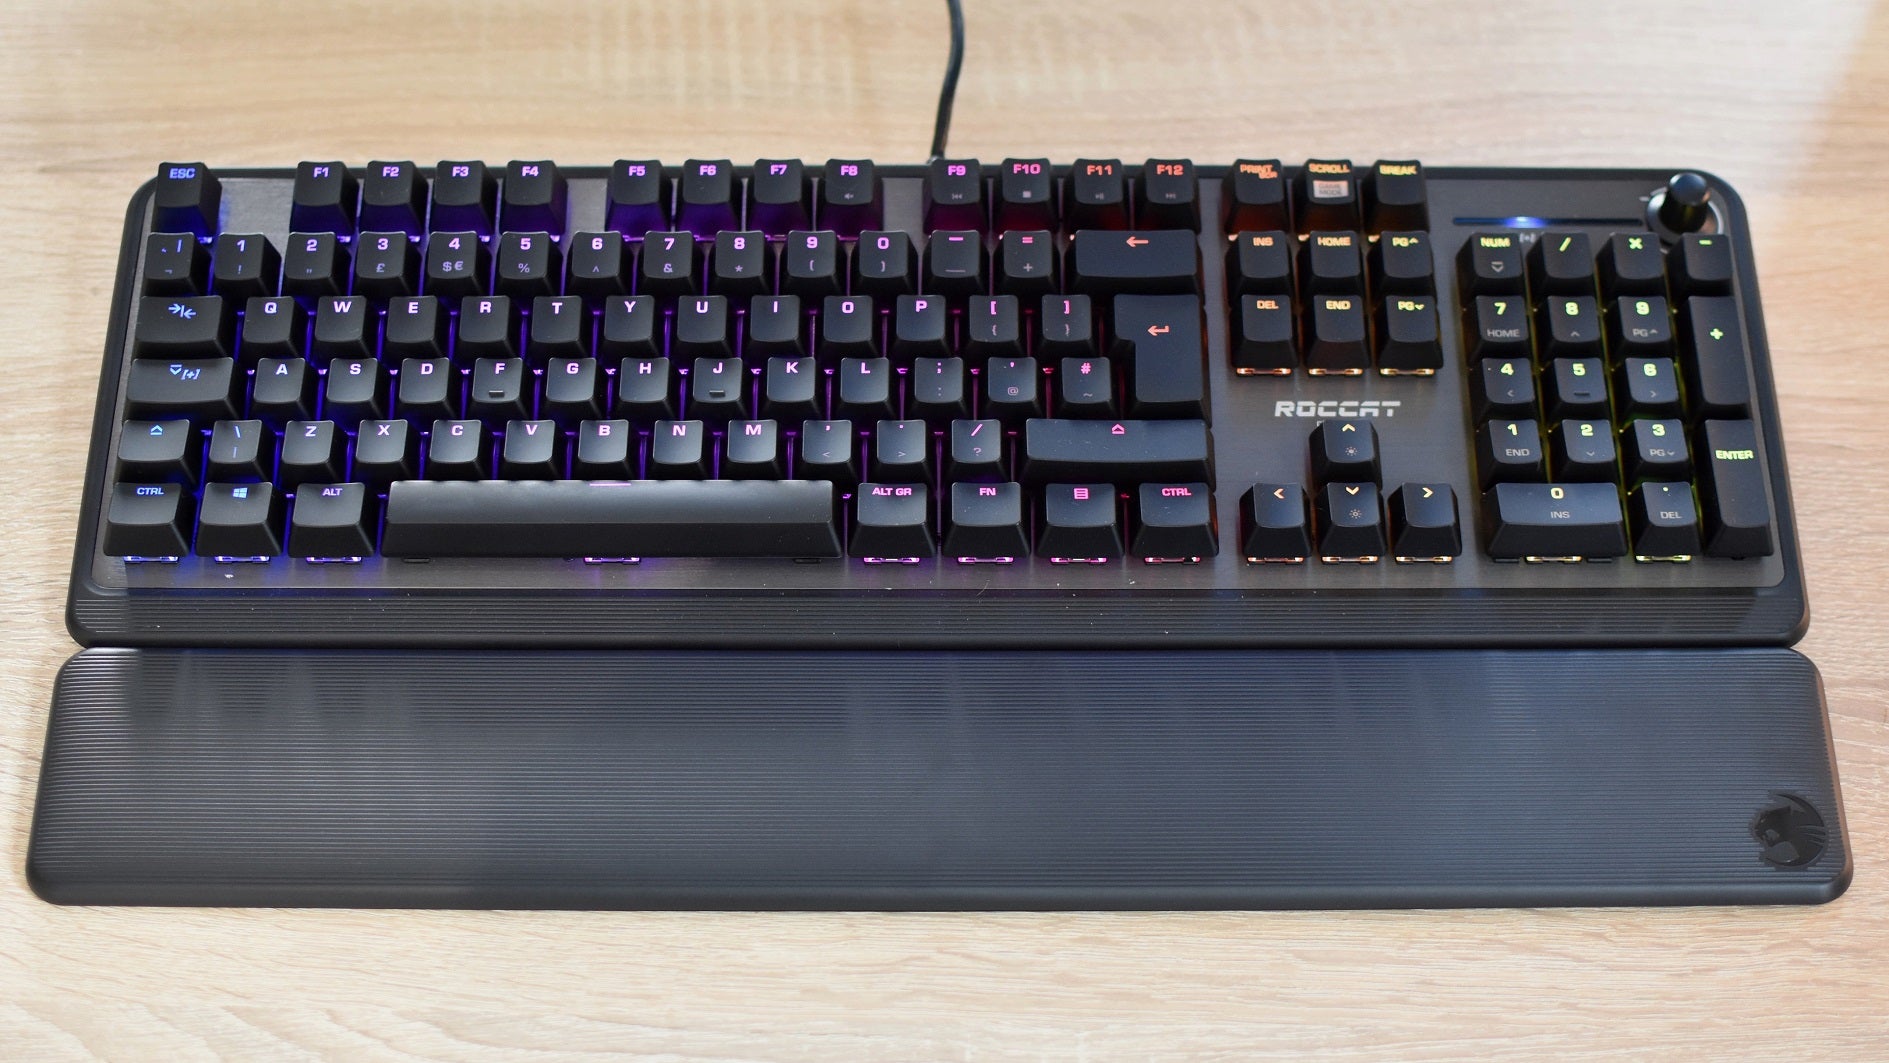 A photo of the Roccat Pyro keyboard with its wrist rest attached.